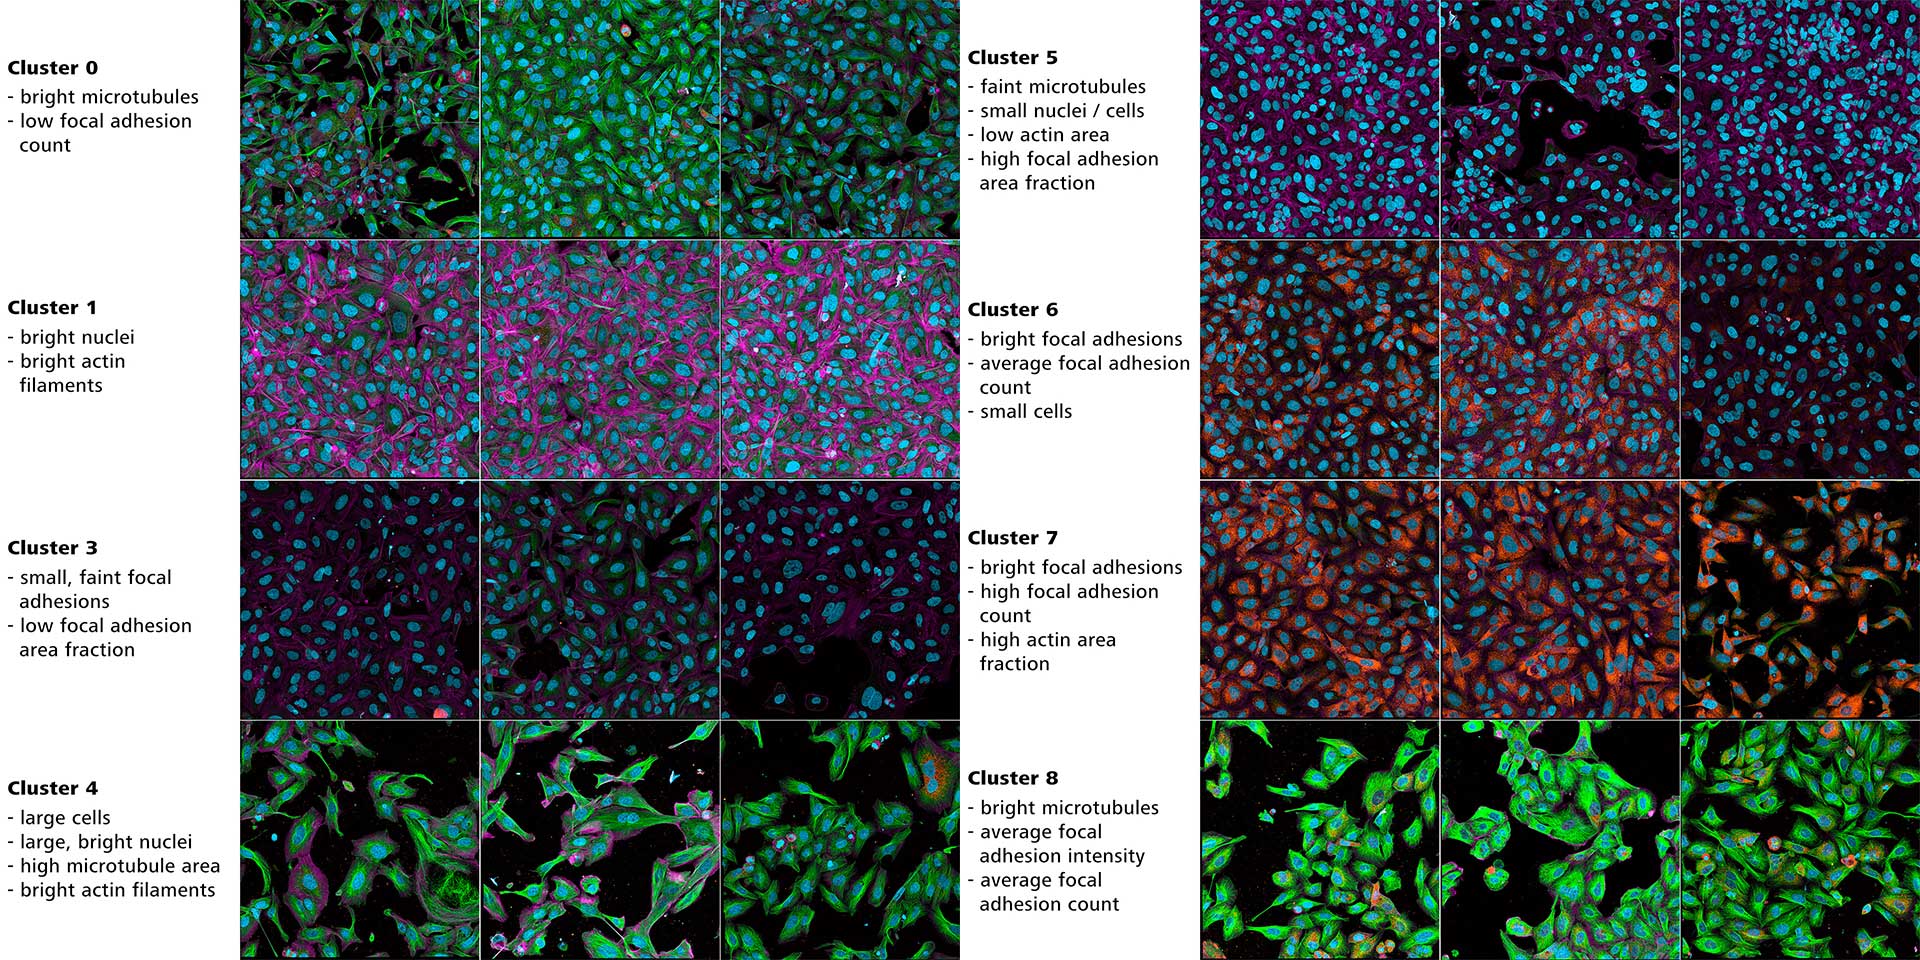 Figure 12: Original images from various clusters as determined by sample-centric cluster analysis. For each cluster, the characteristic differentiating features are displayed.